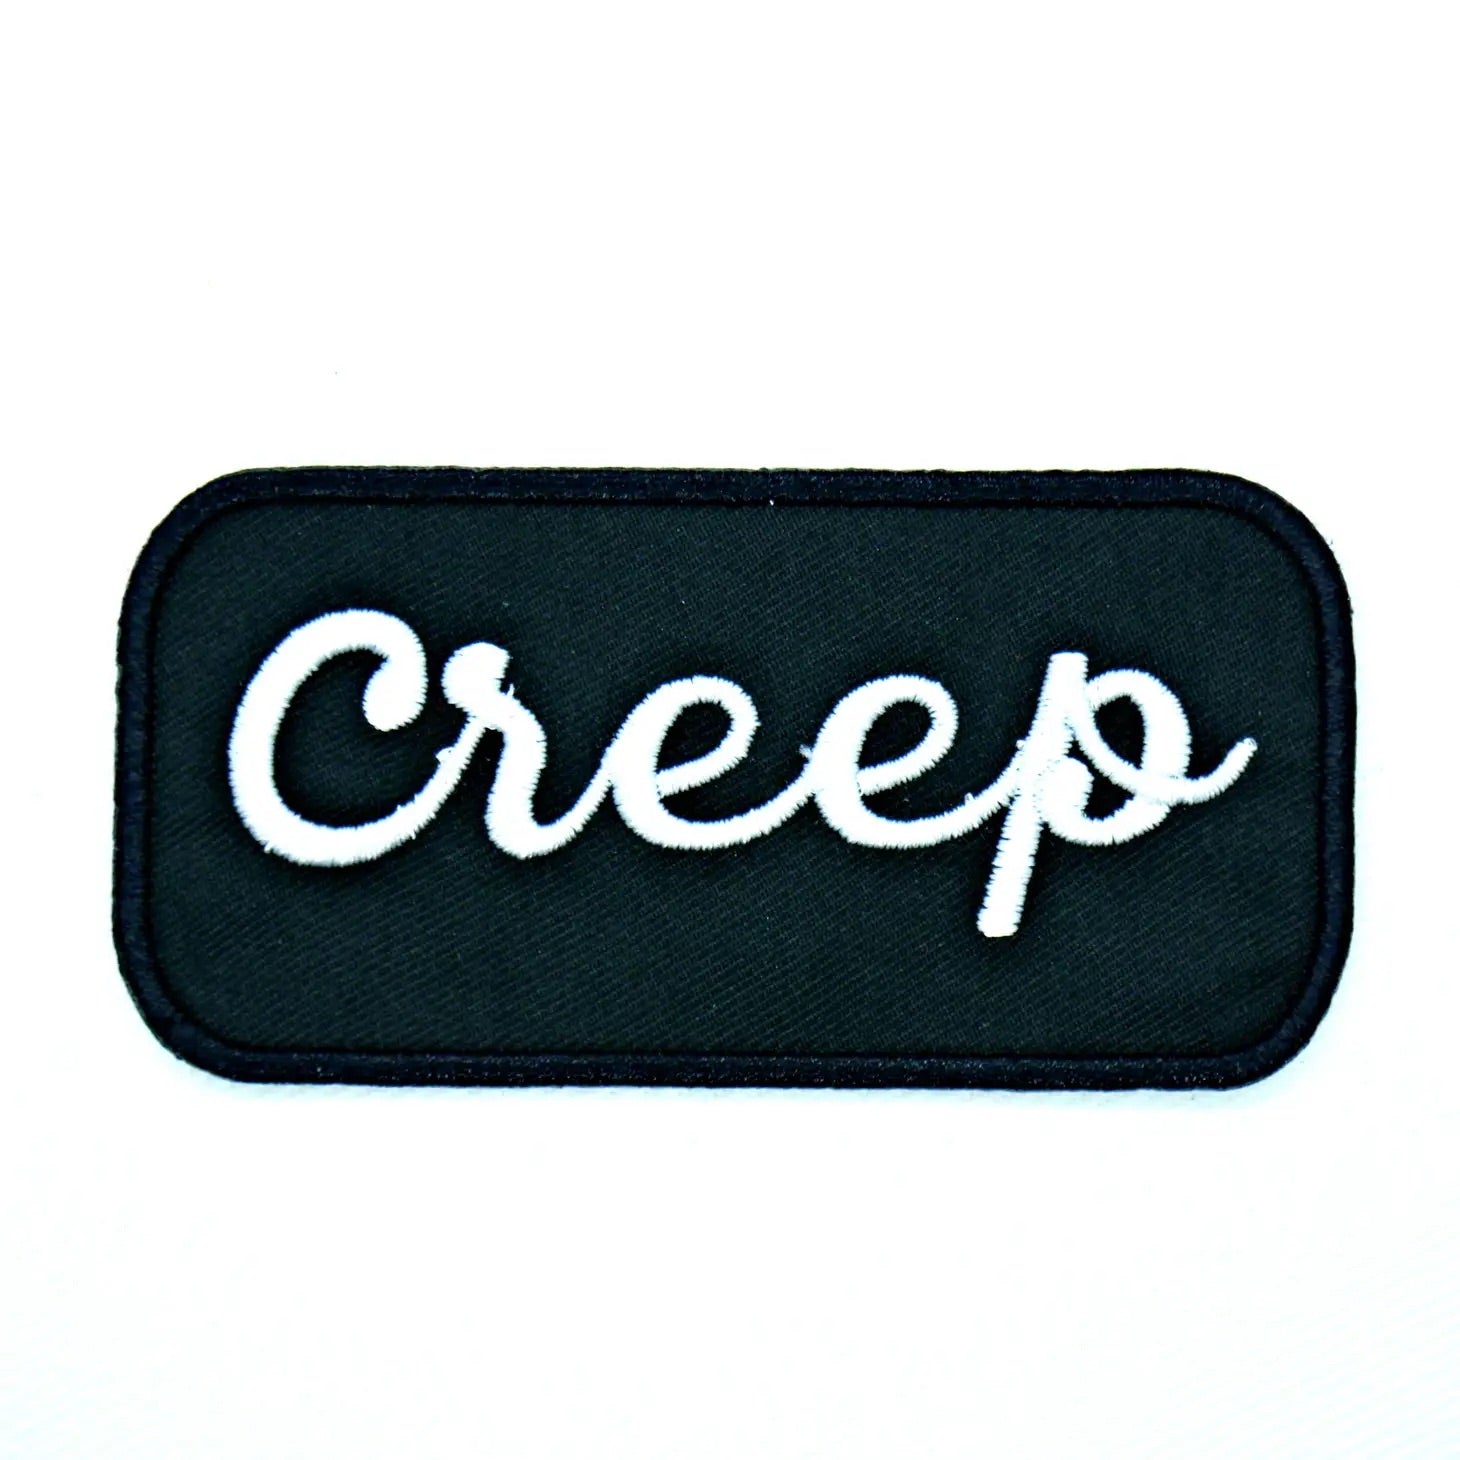 Black & white "Creep” cursive name tag style embroidered patch. Black background with white lettering 